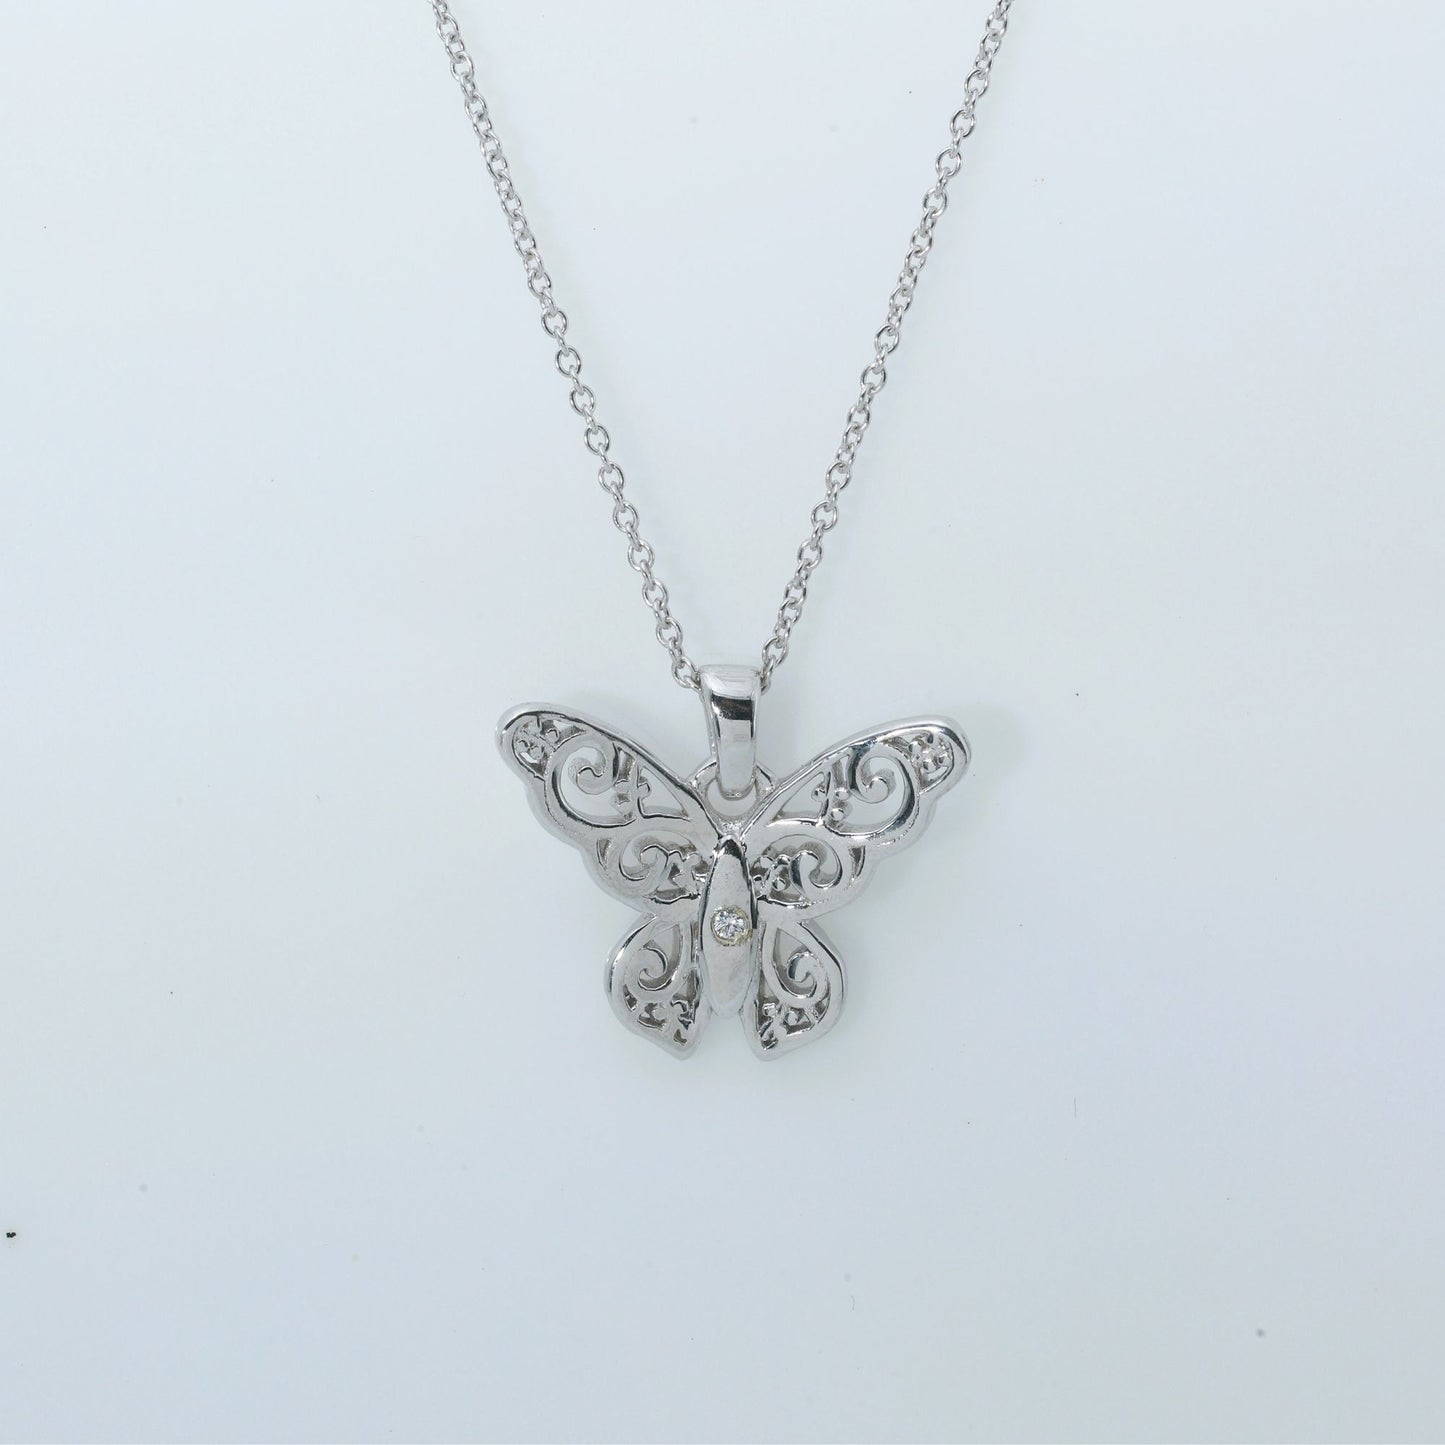 CHARMING BUTTERFLY NECKLACE - STERLING SILVER